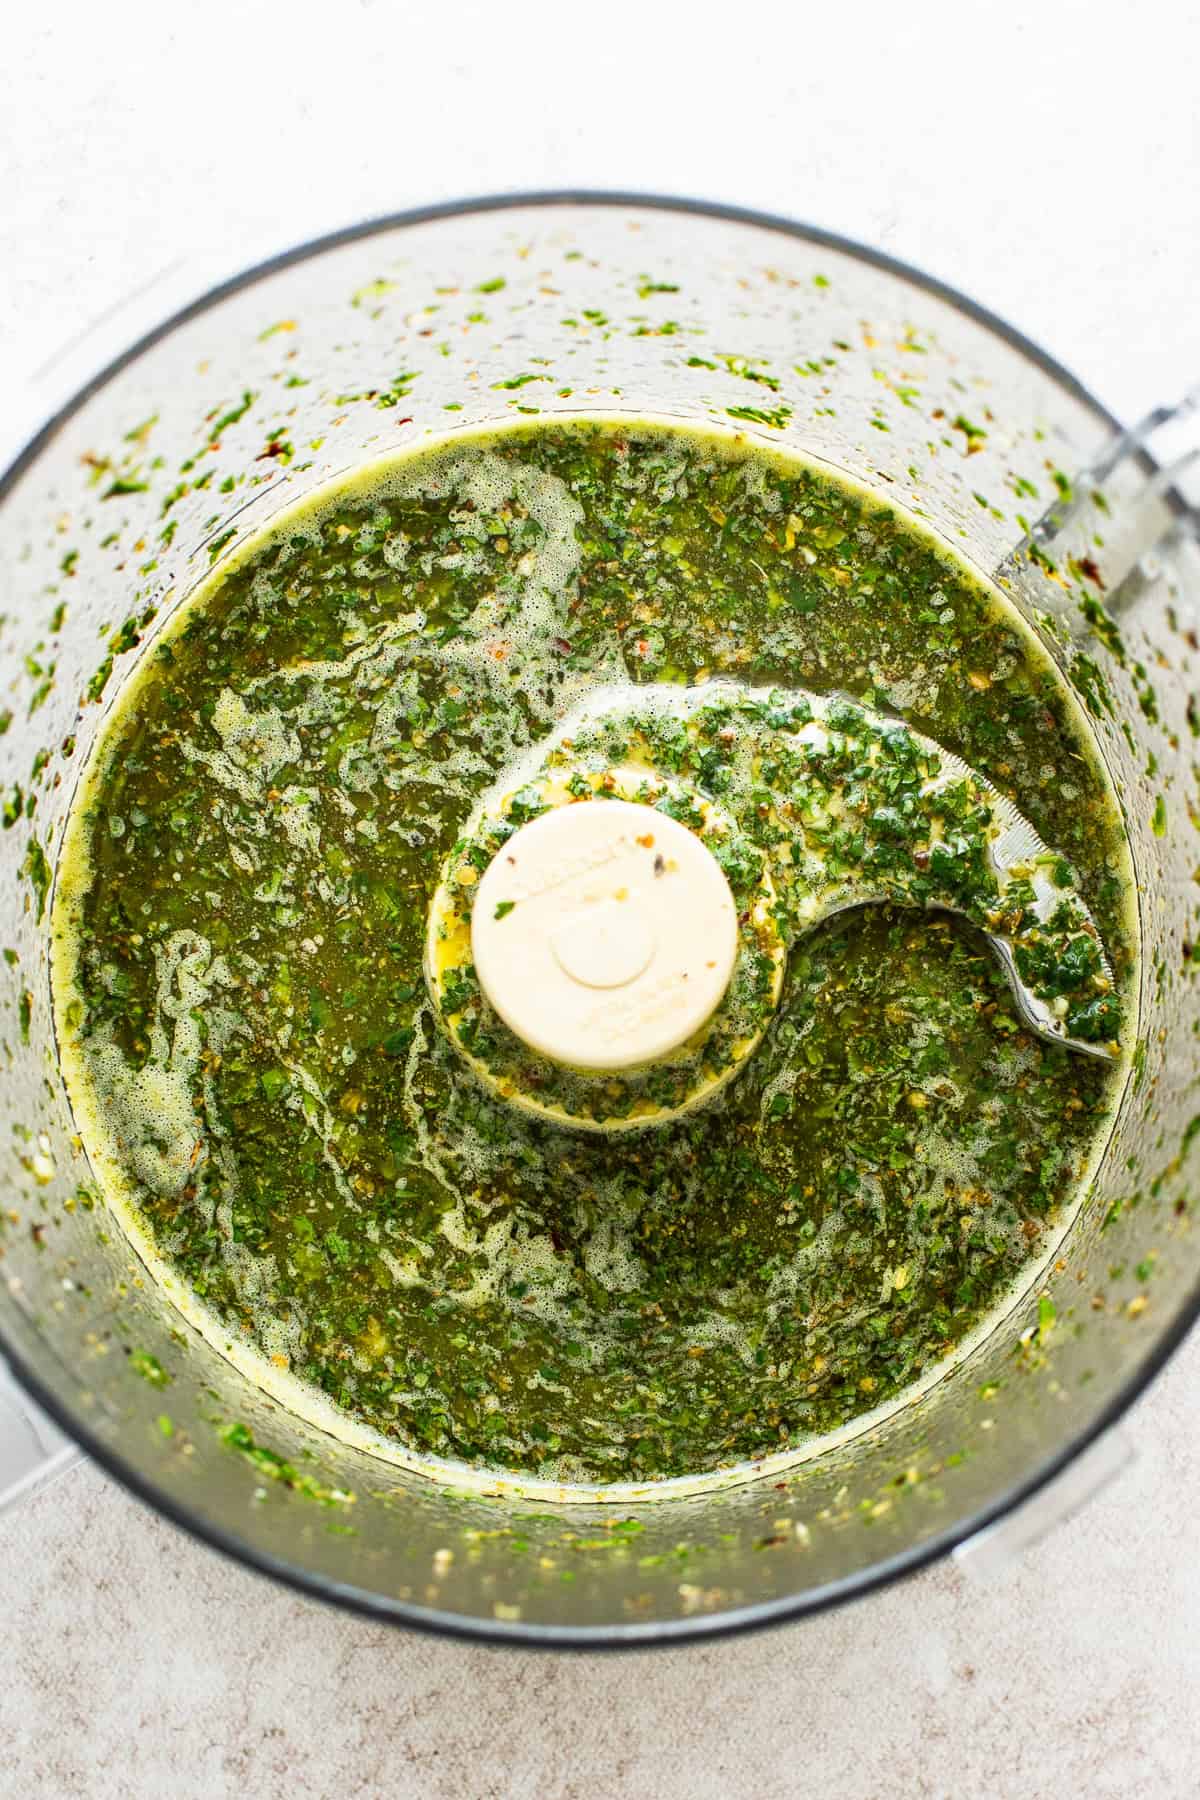 All ingredients for the chimichurri sauce added and blended in a  food processor